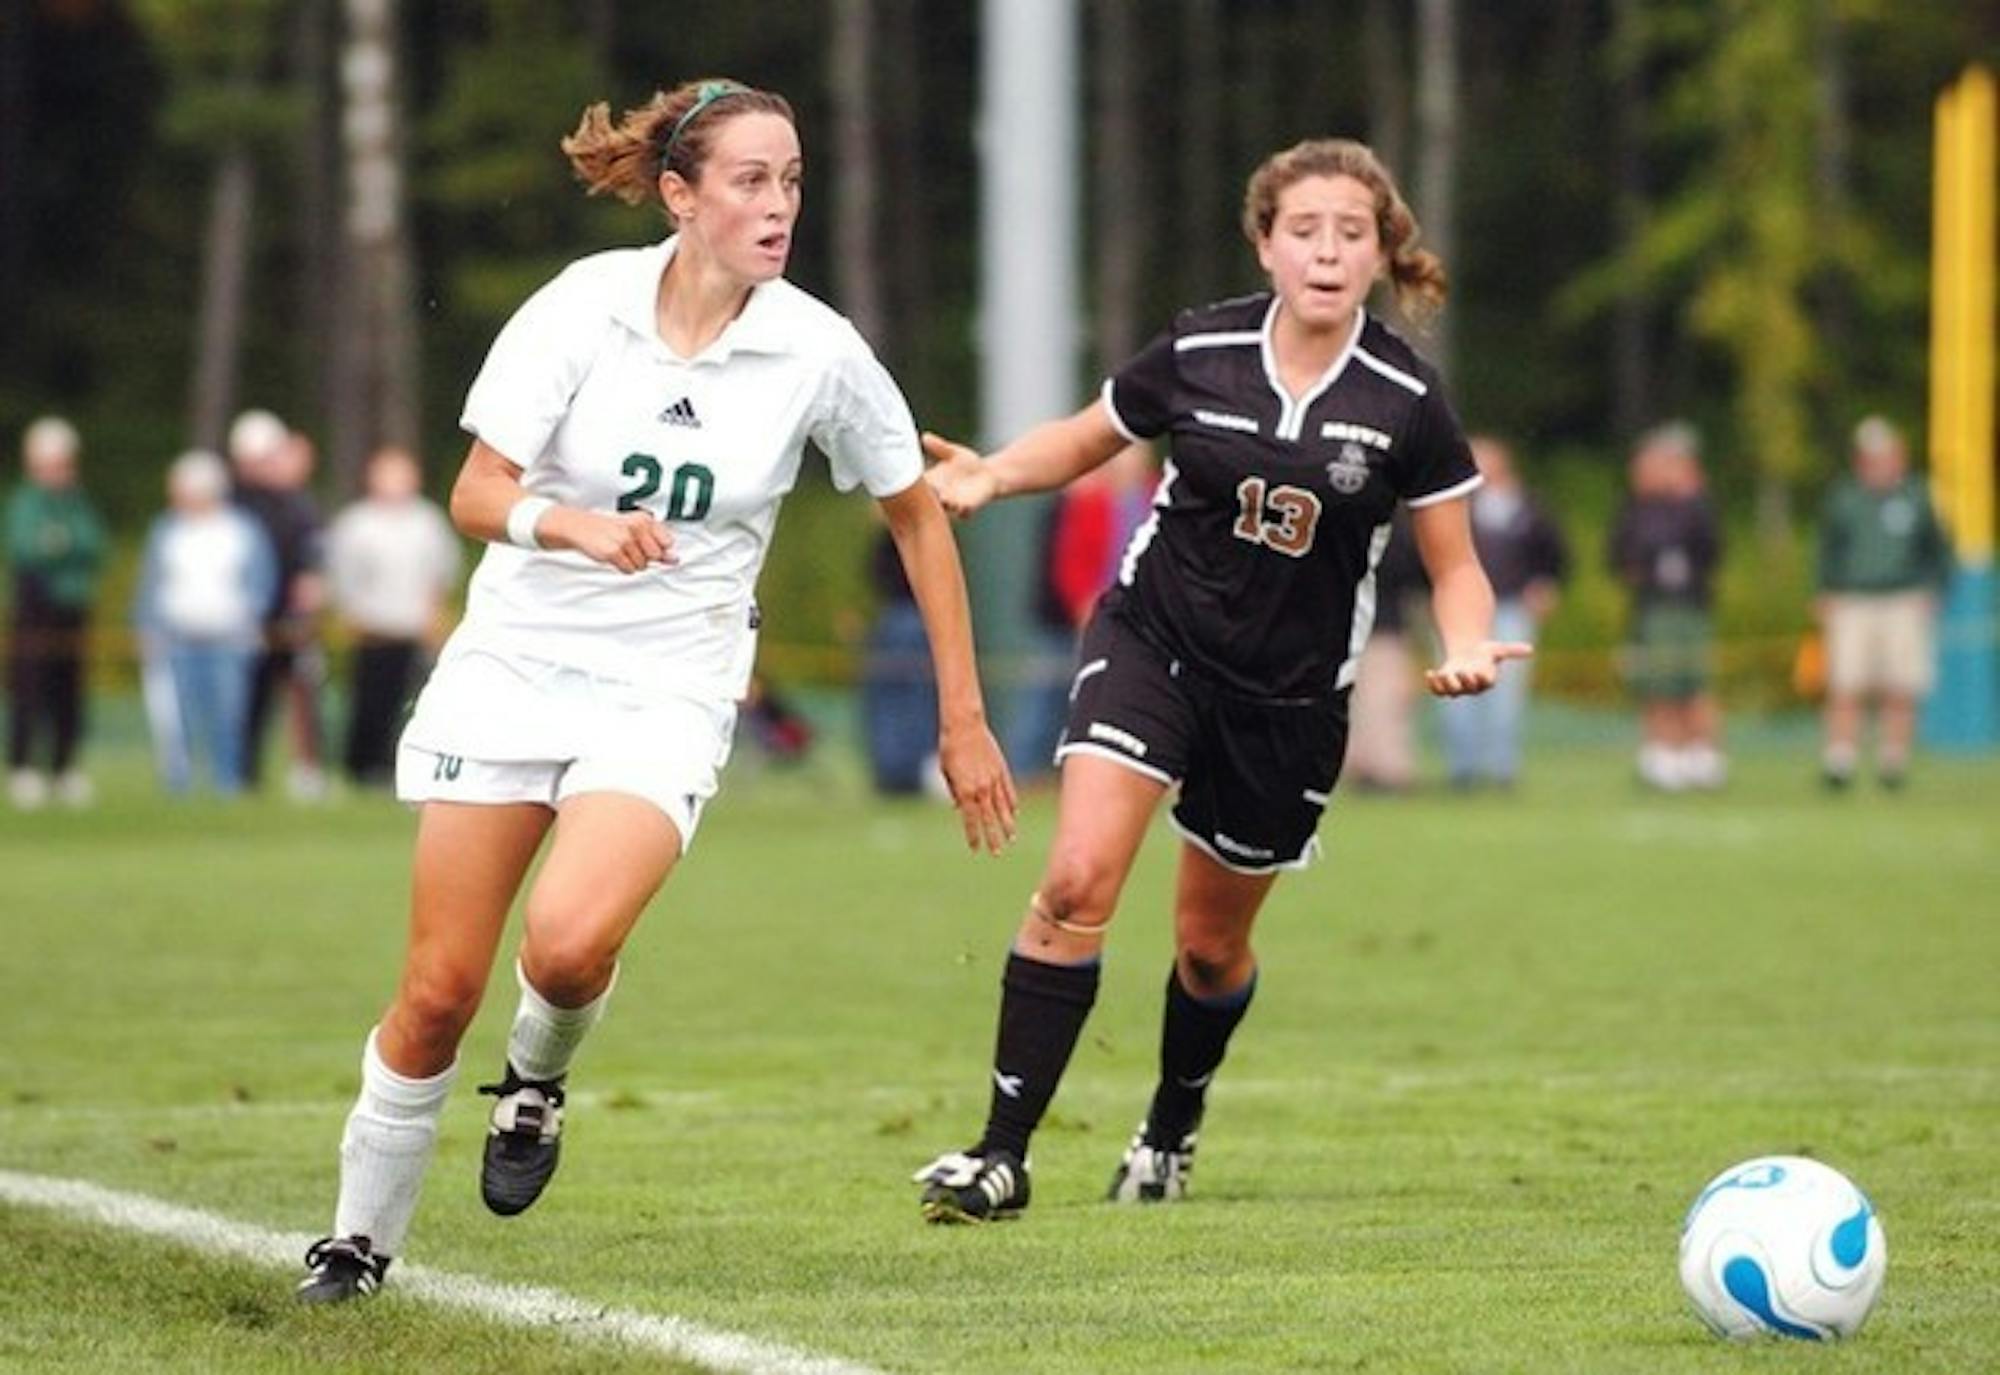 Women's soccer dominated virtually every statistical category other than score against Syracuse, but the team struggled to capitalize on scoring chances.